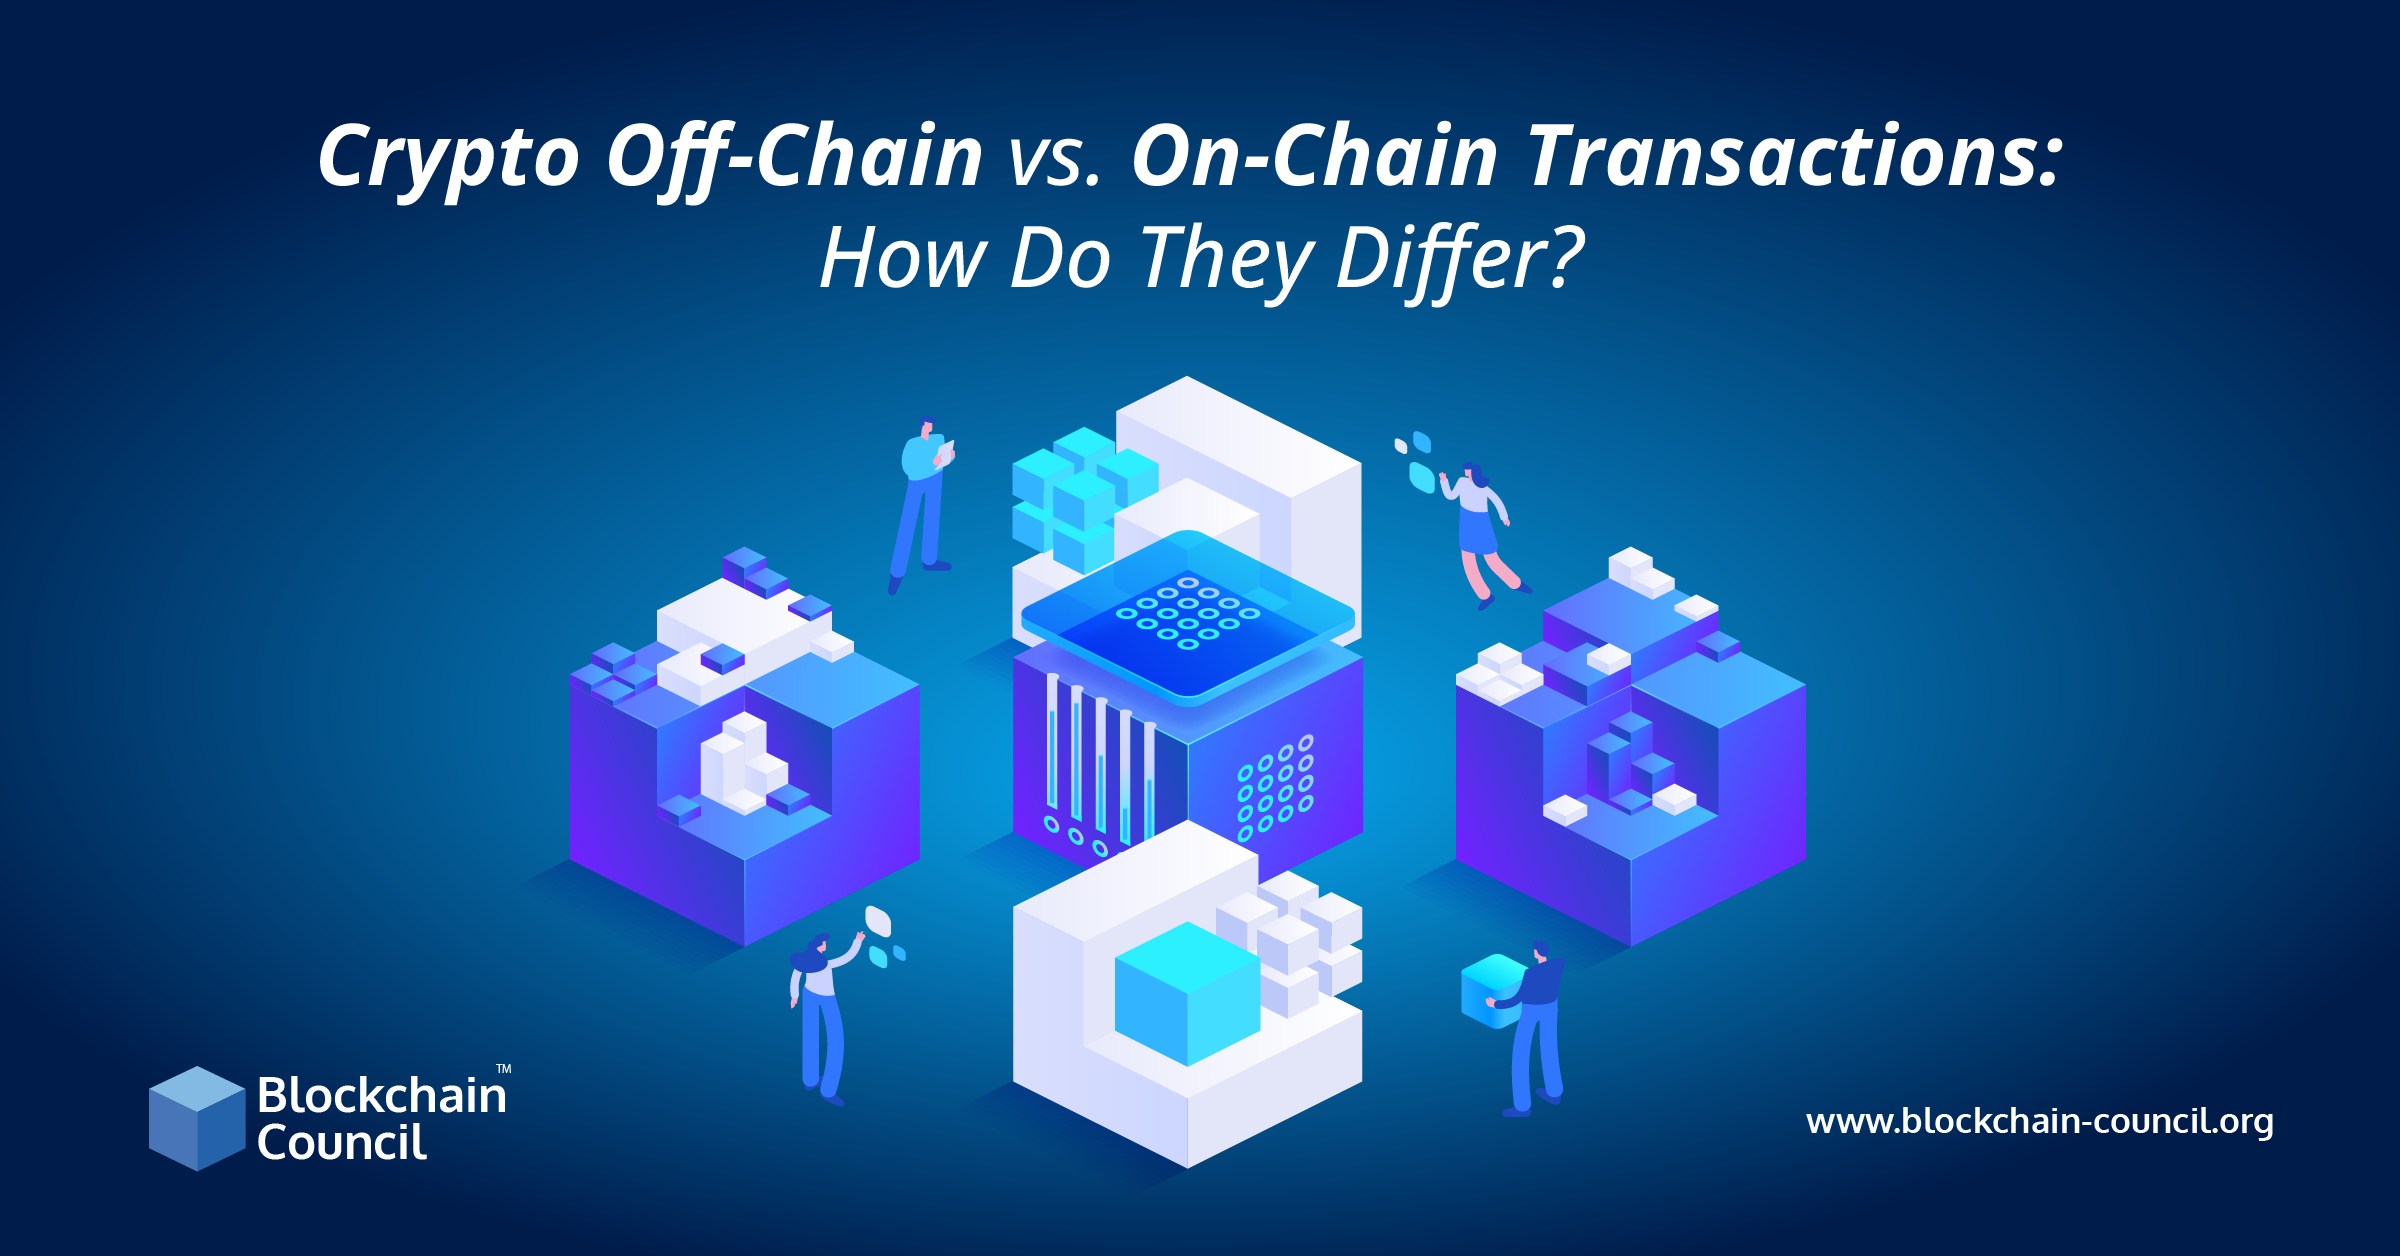 Crypto Off-Chain vs. On-Chain Transactions: How Do They Differ?